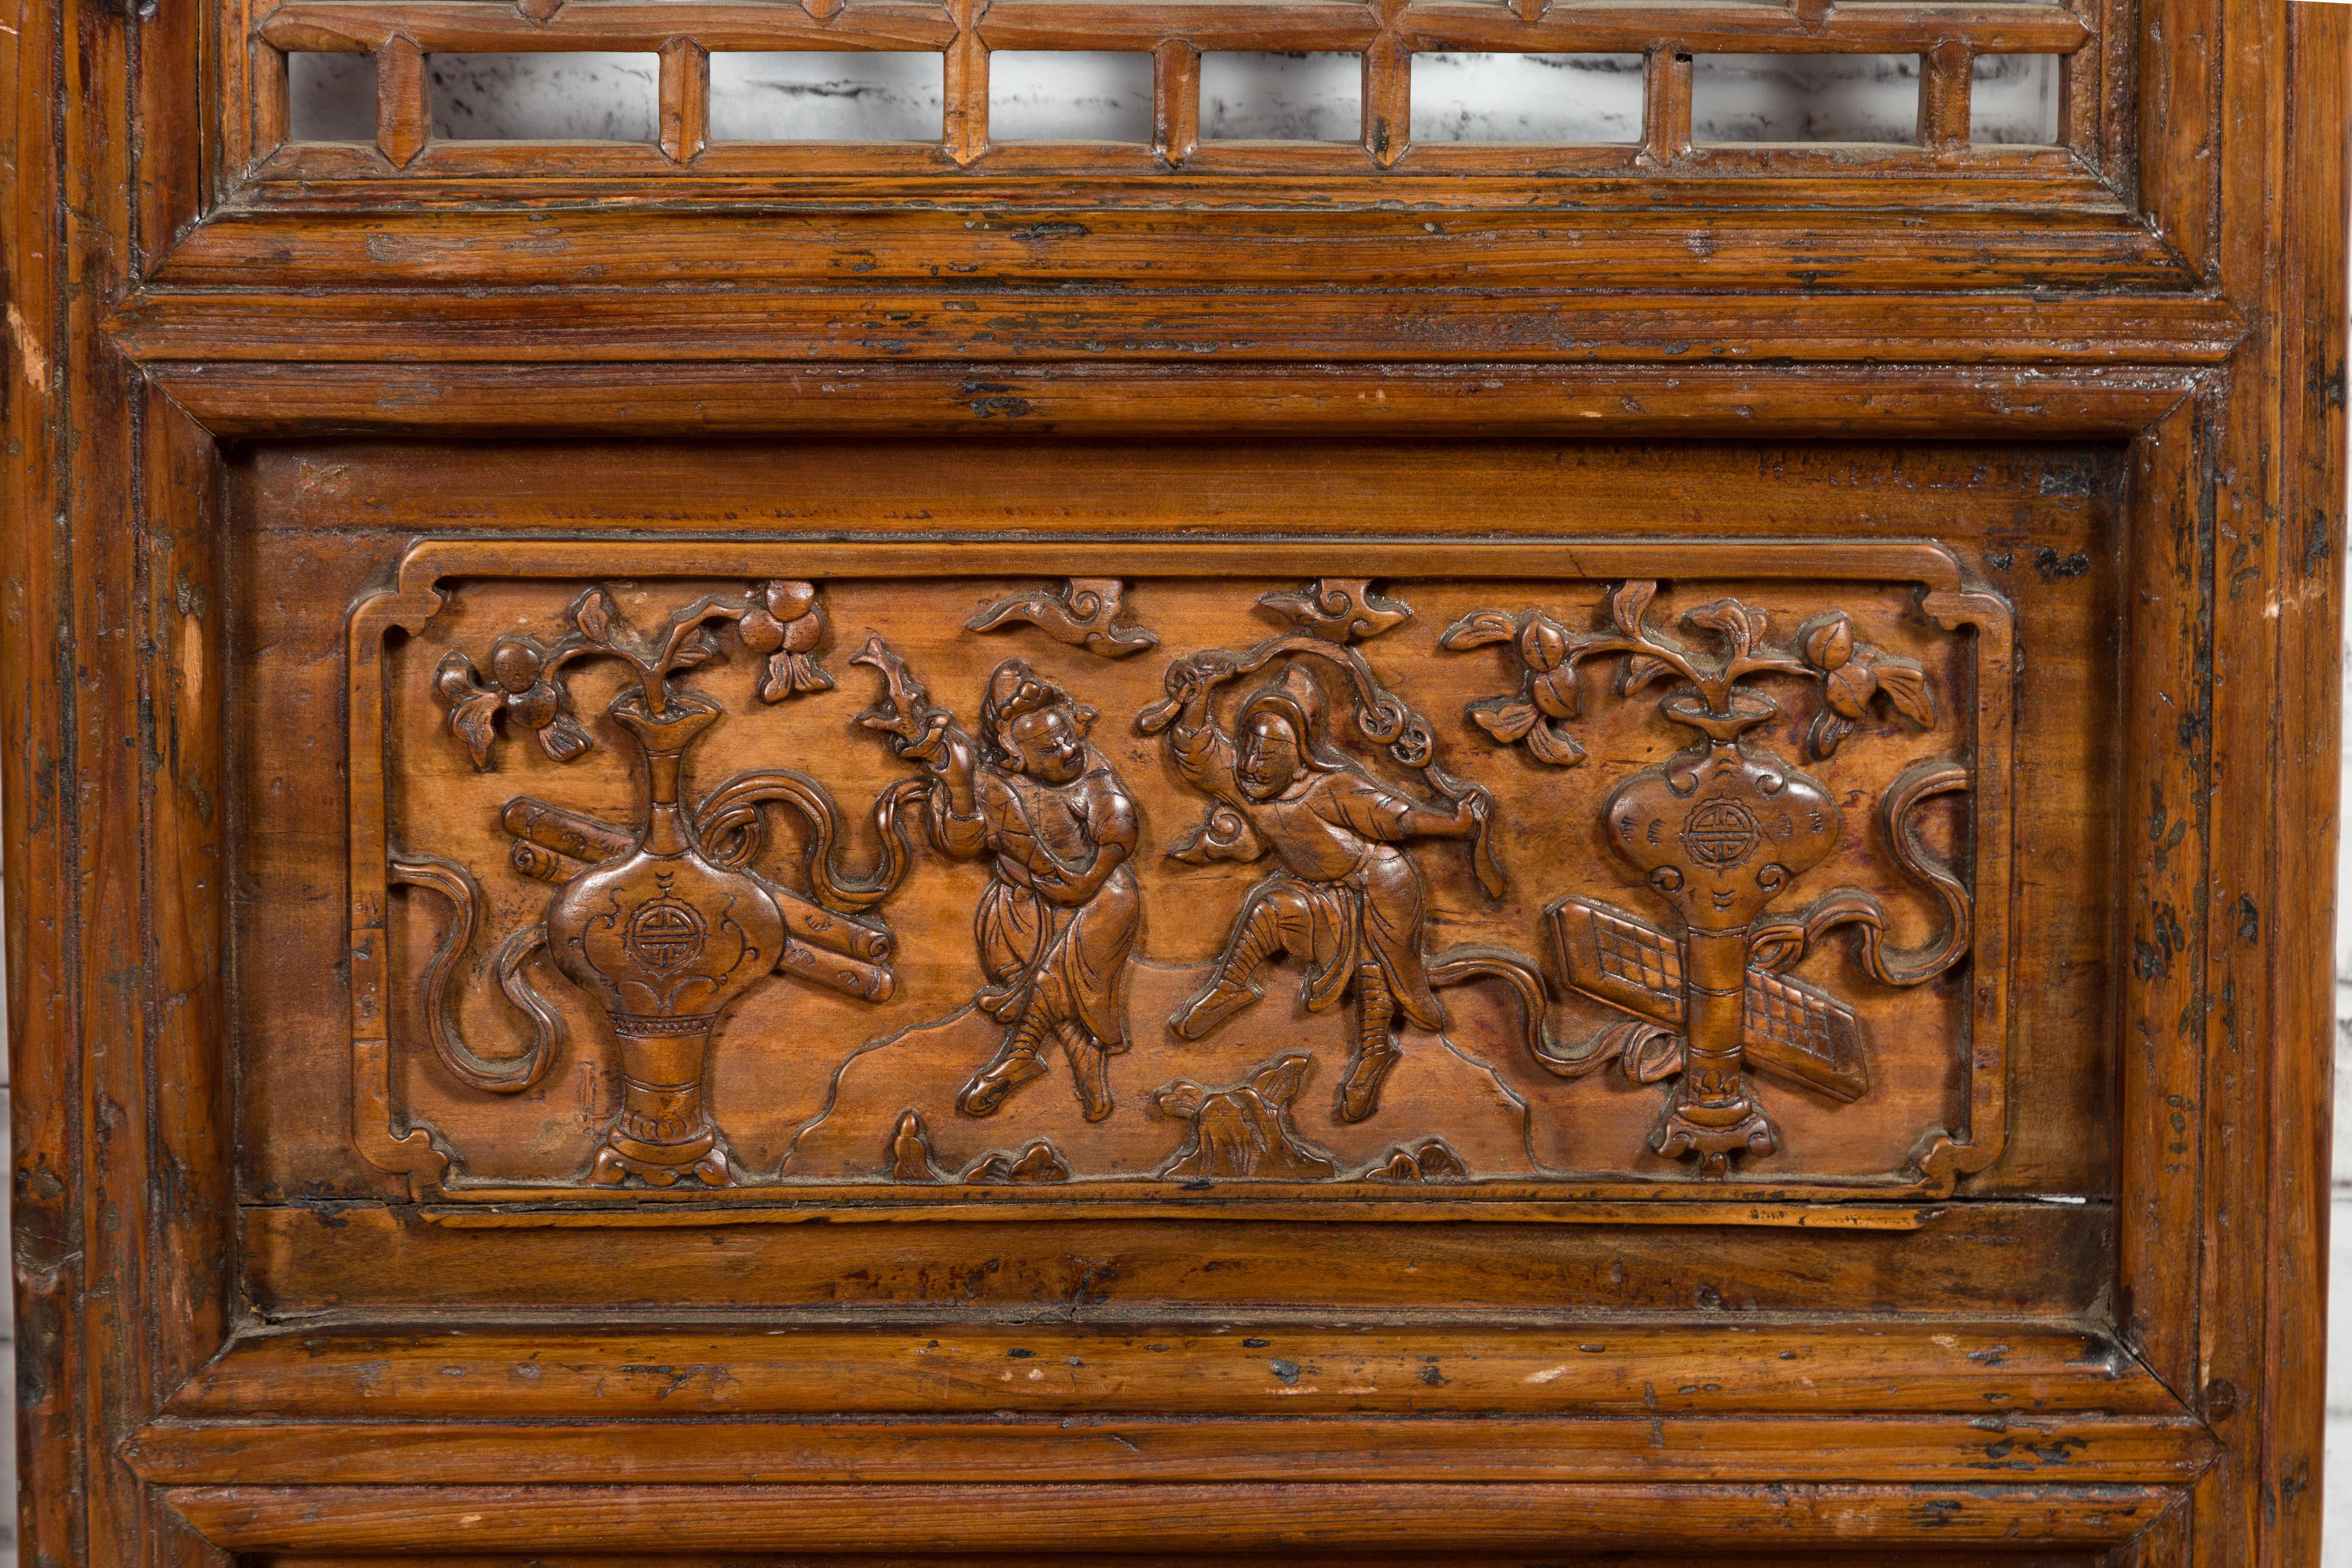 Pair of Chinese 19th Century Screens with Fretwork and Low-Relief Carved Panels 4